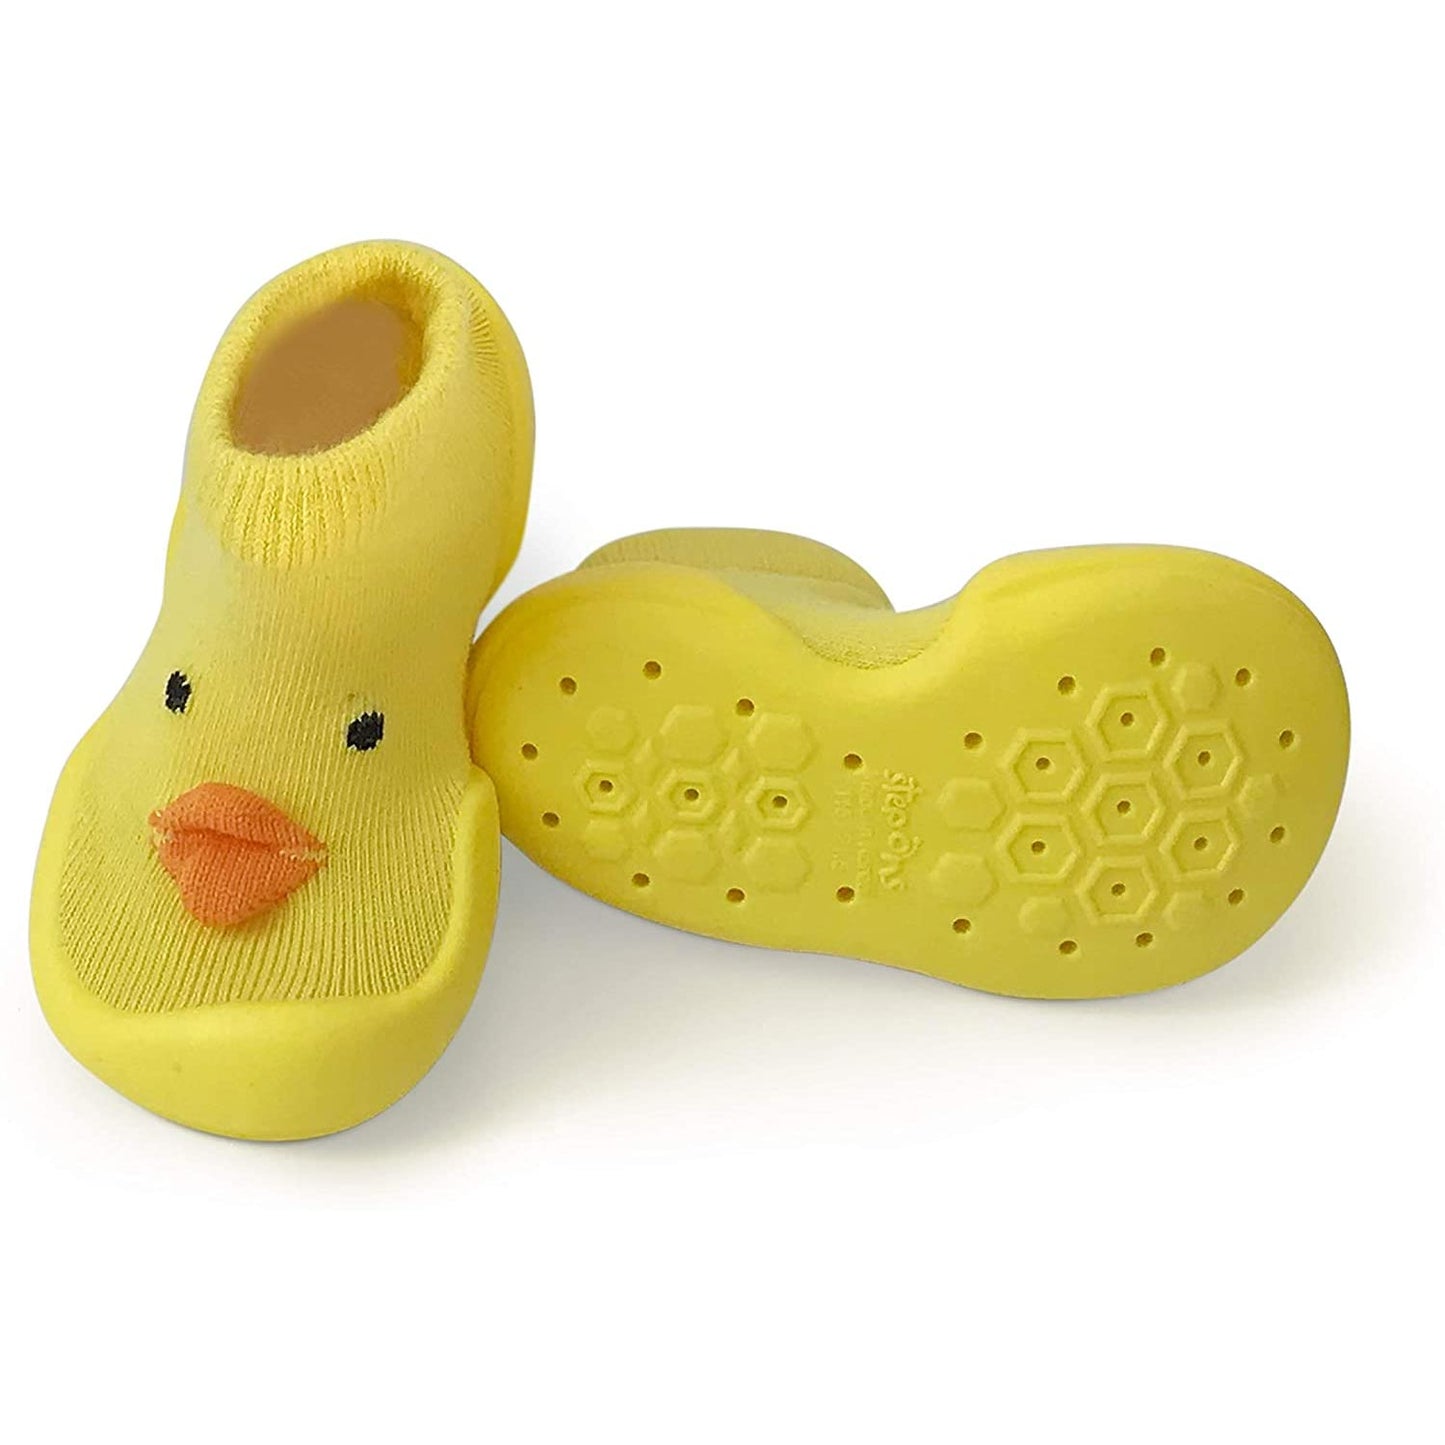 Step Ons Baby Sock Shoe (Yellow Chick)